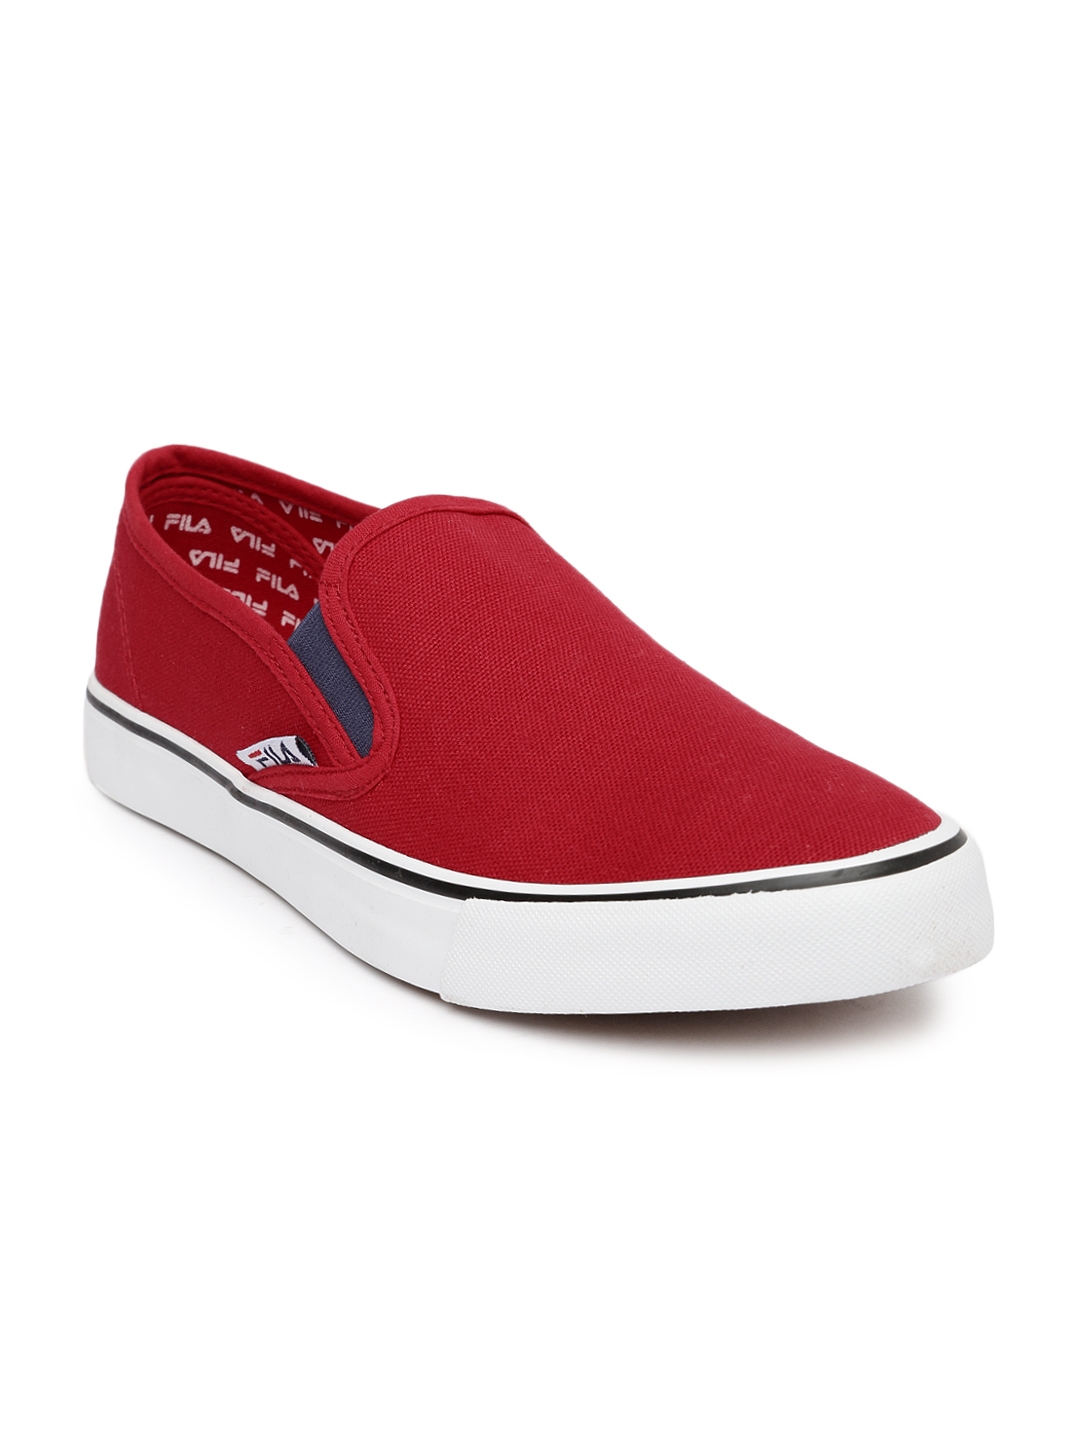 Buy FILA Unisex Red Relaxer IV Loafers - Casual Shoes for Unisex ...